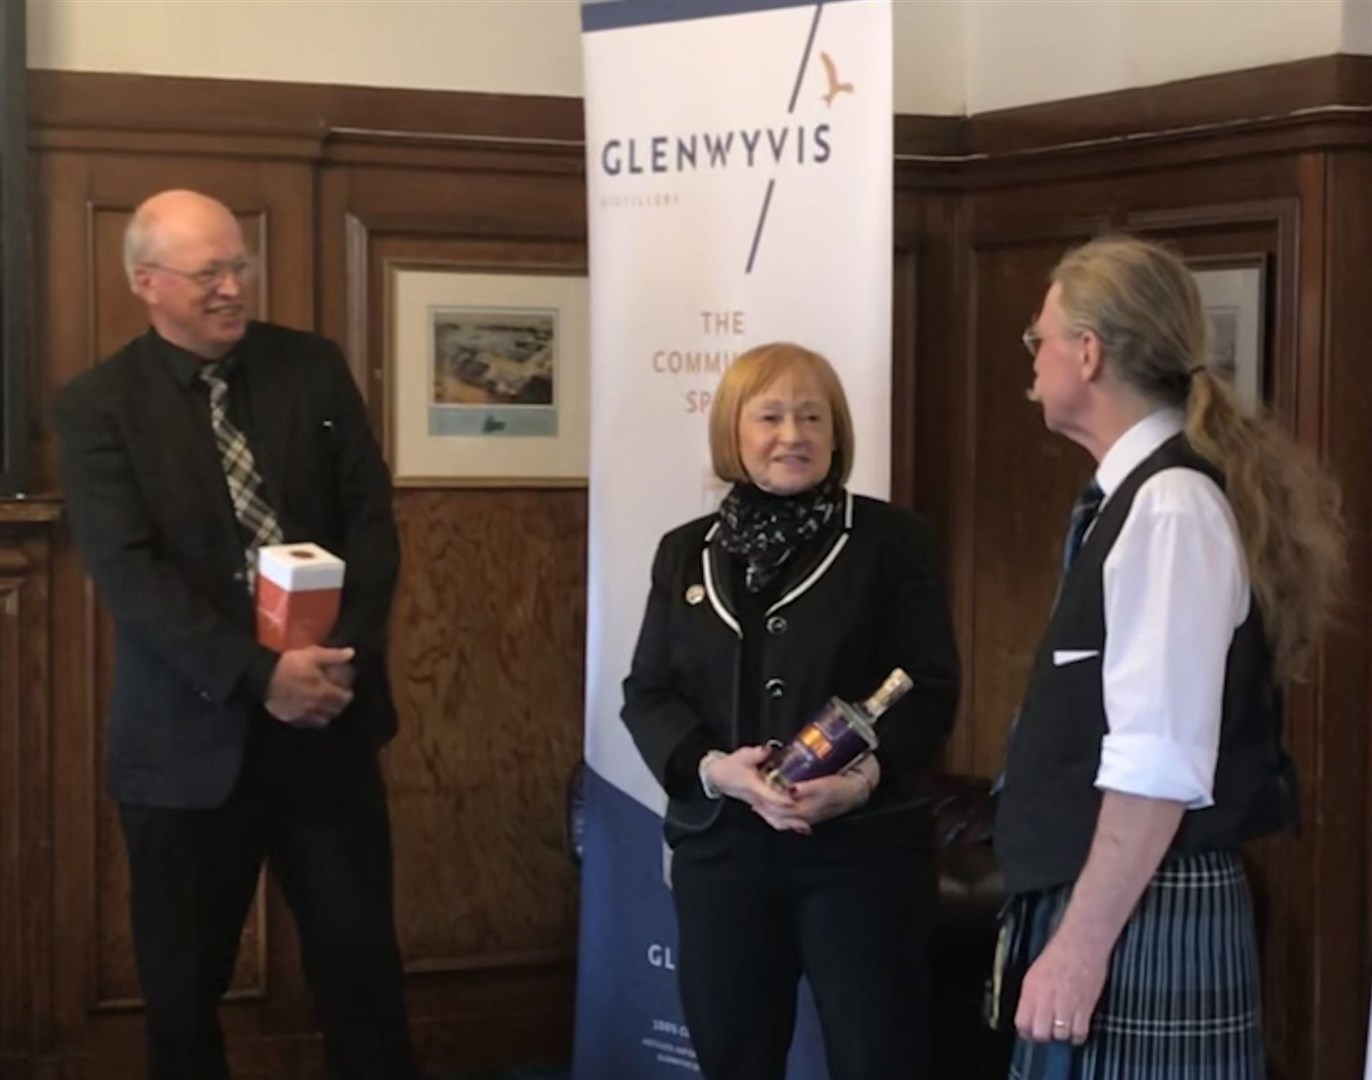 Torquil Maclean and Alison Matheson of Dingwall Gaelic Choir, who received a grant from the GlenWyvis Distillery good will fund.